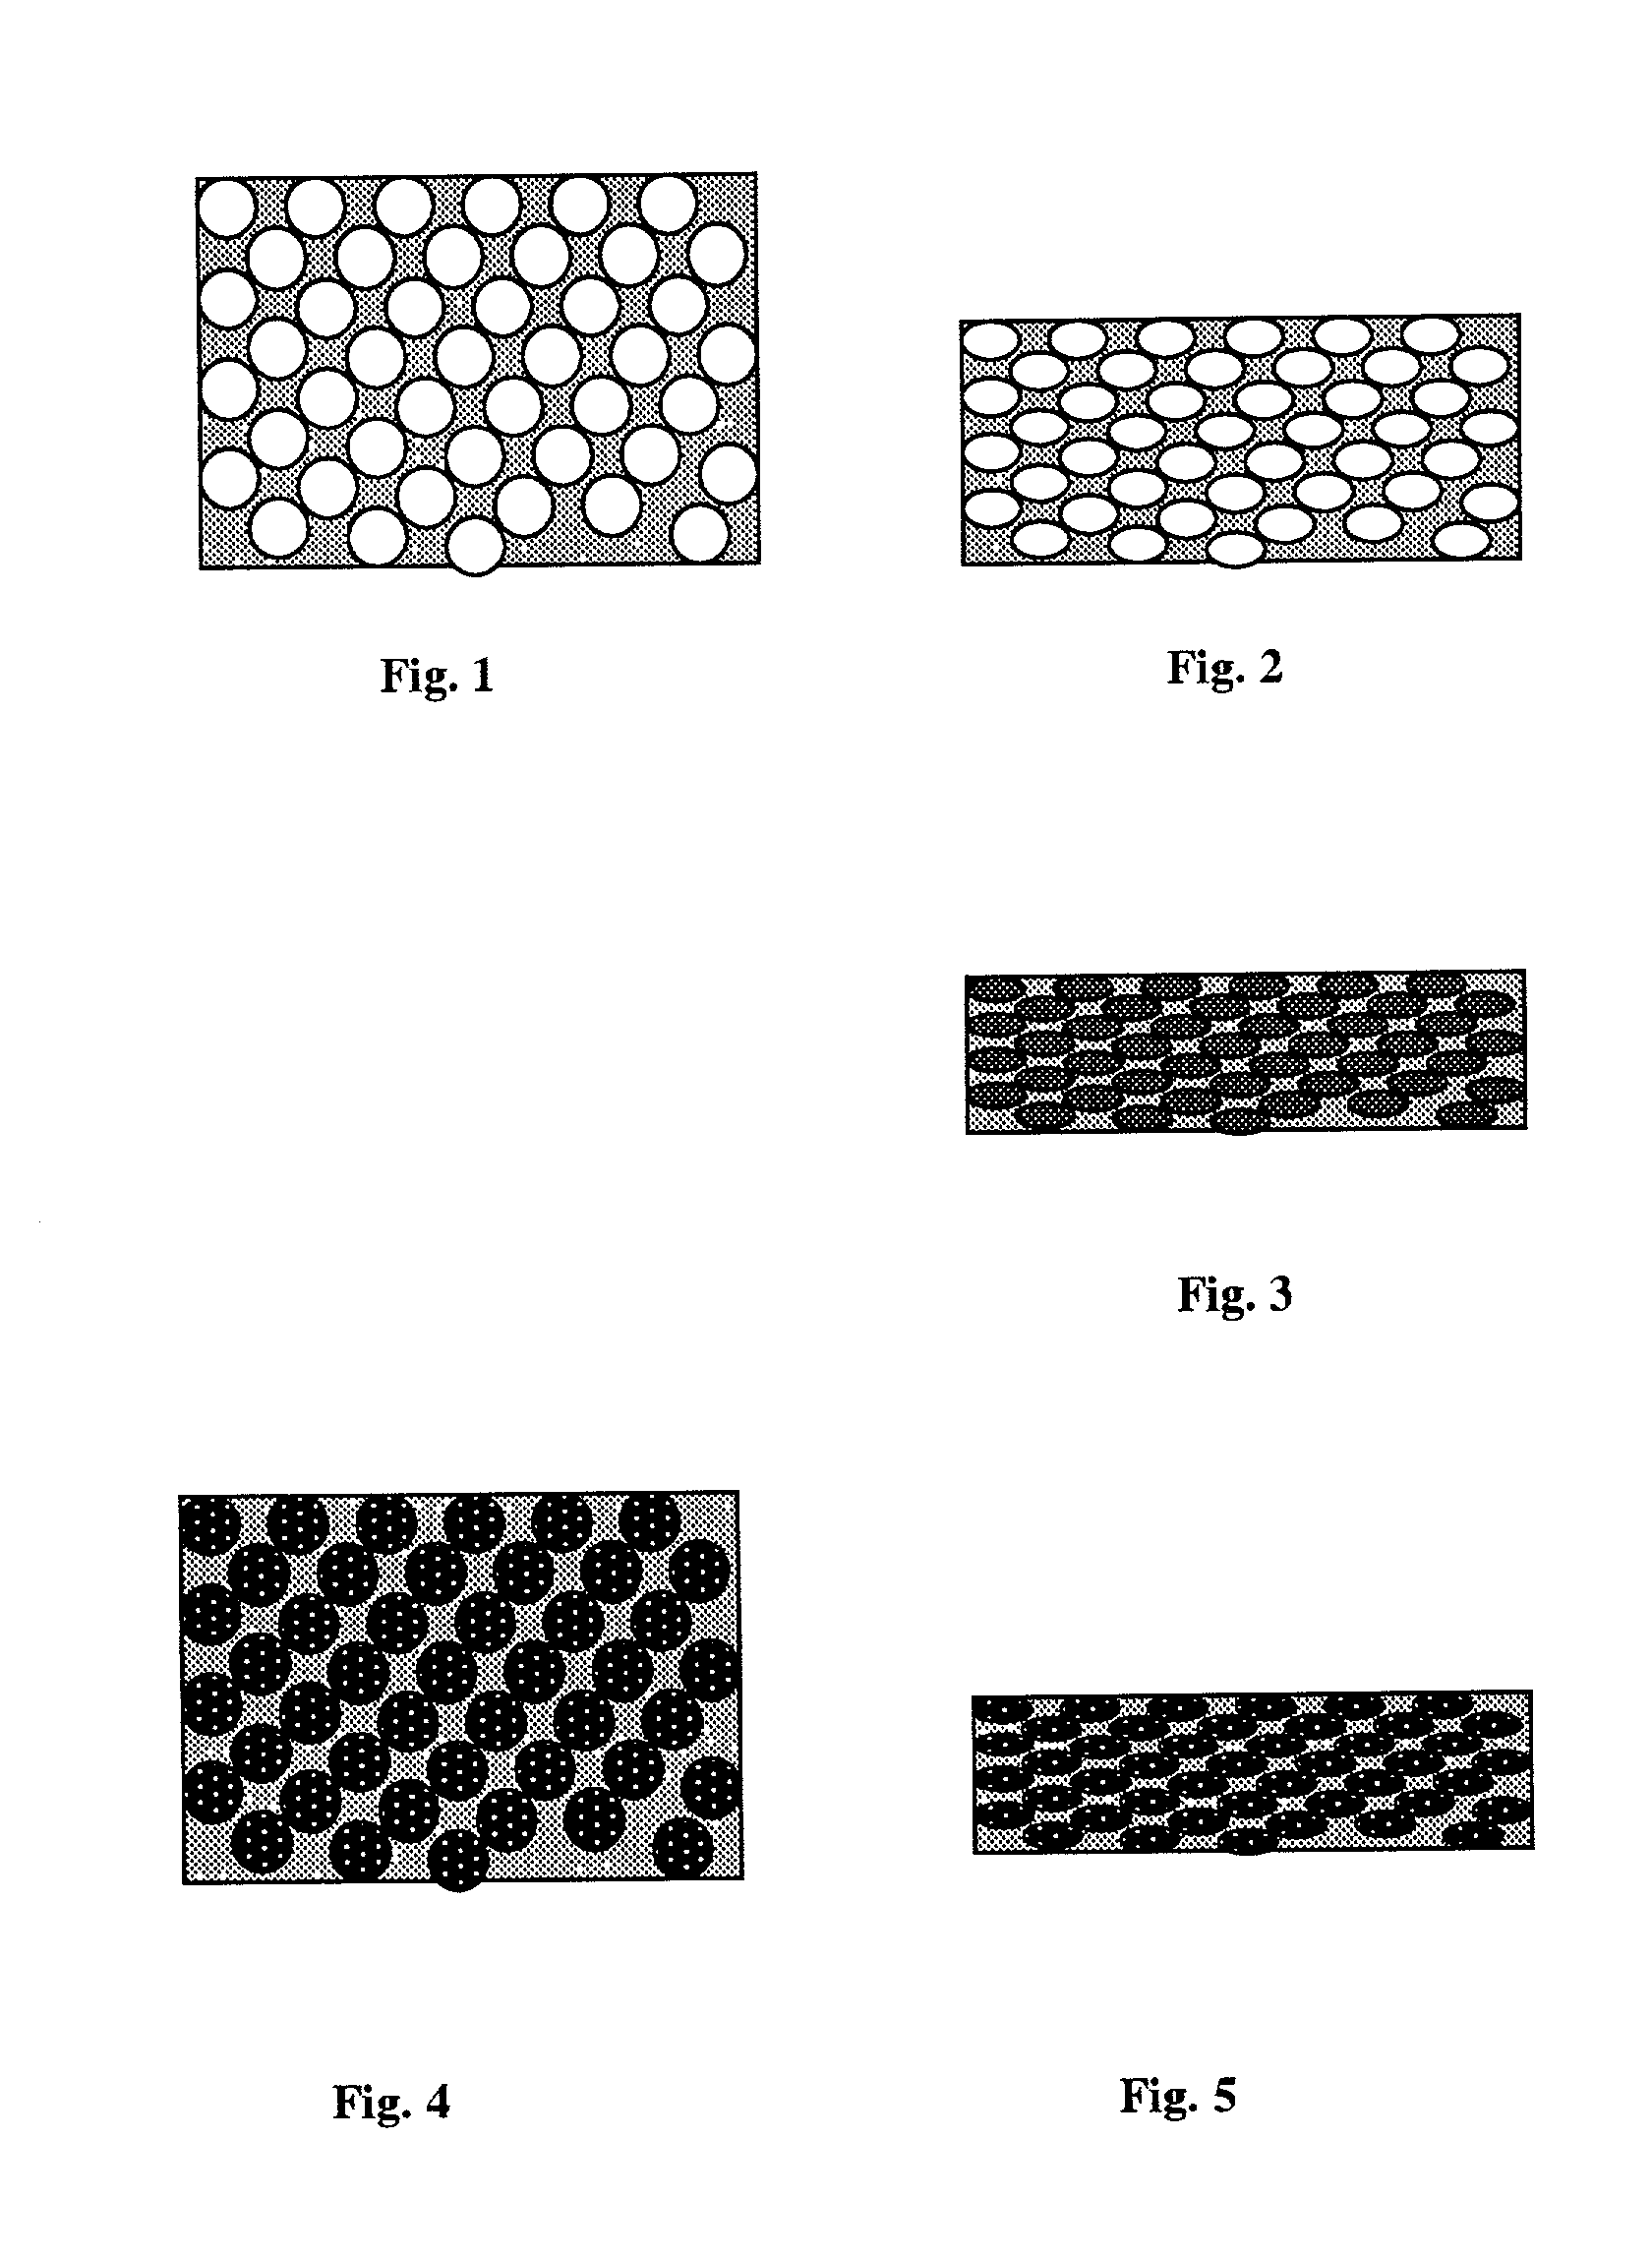 Manufacture of lightweight metal matrix composites with controlled structure